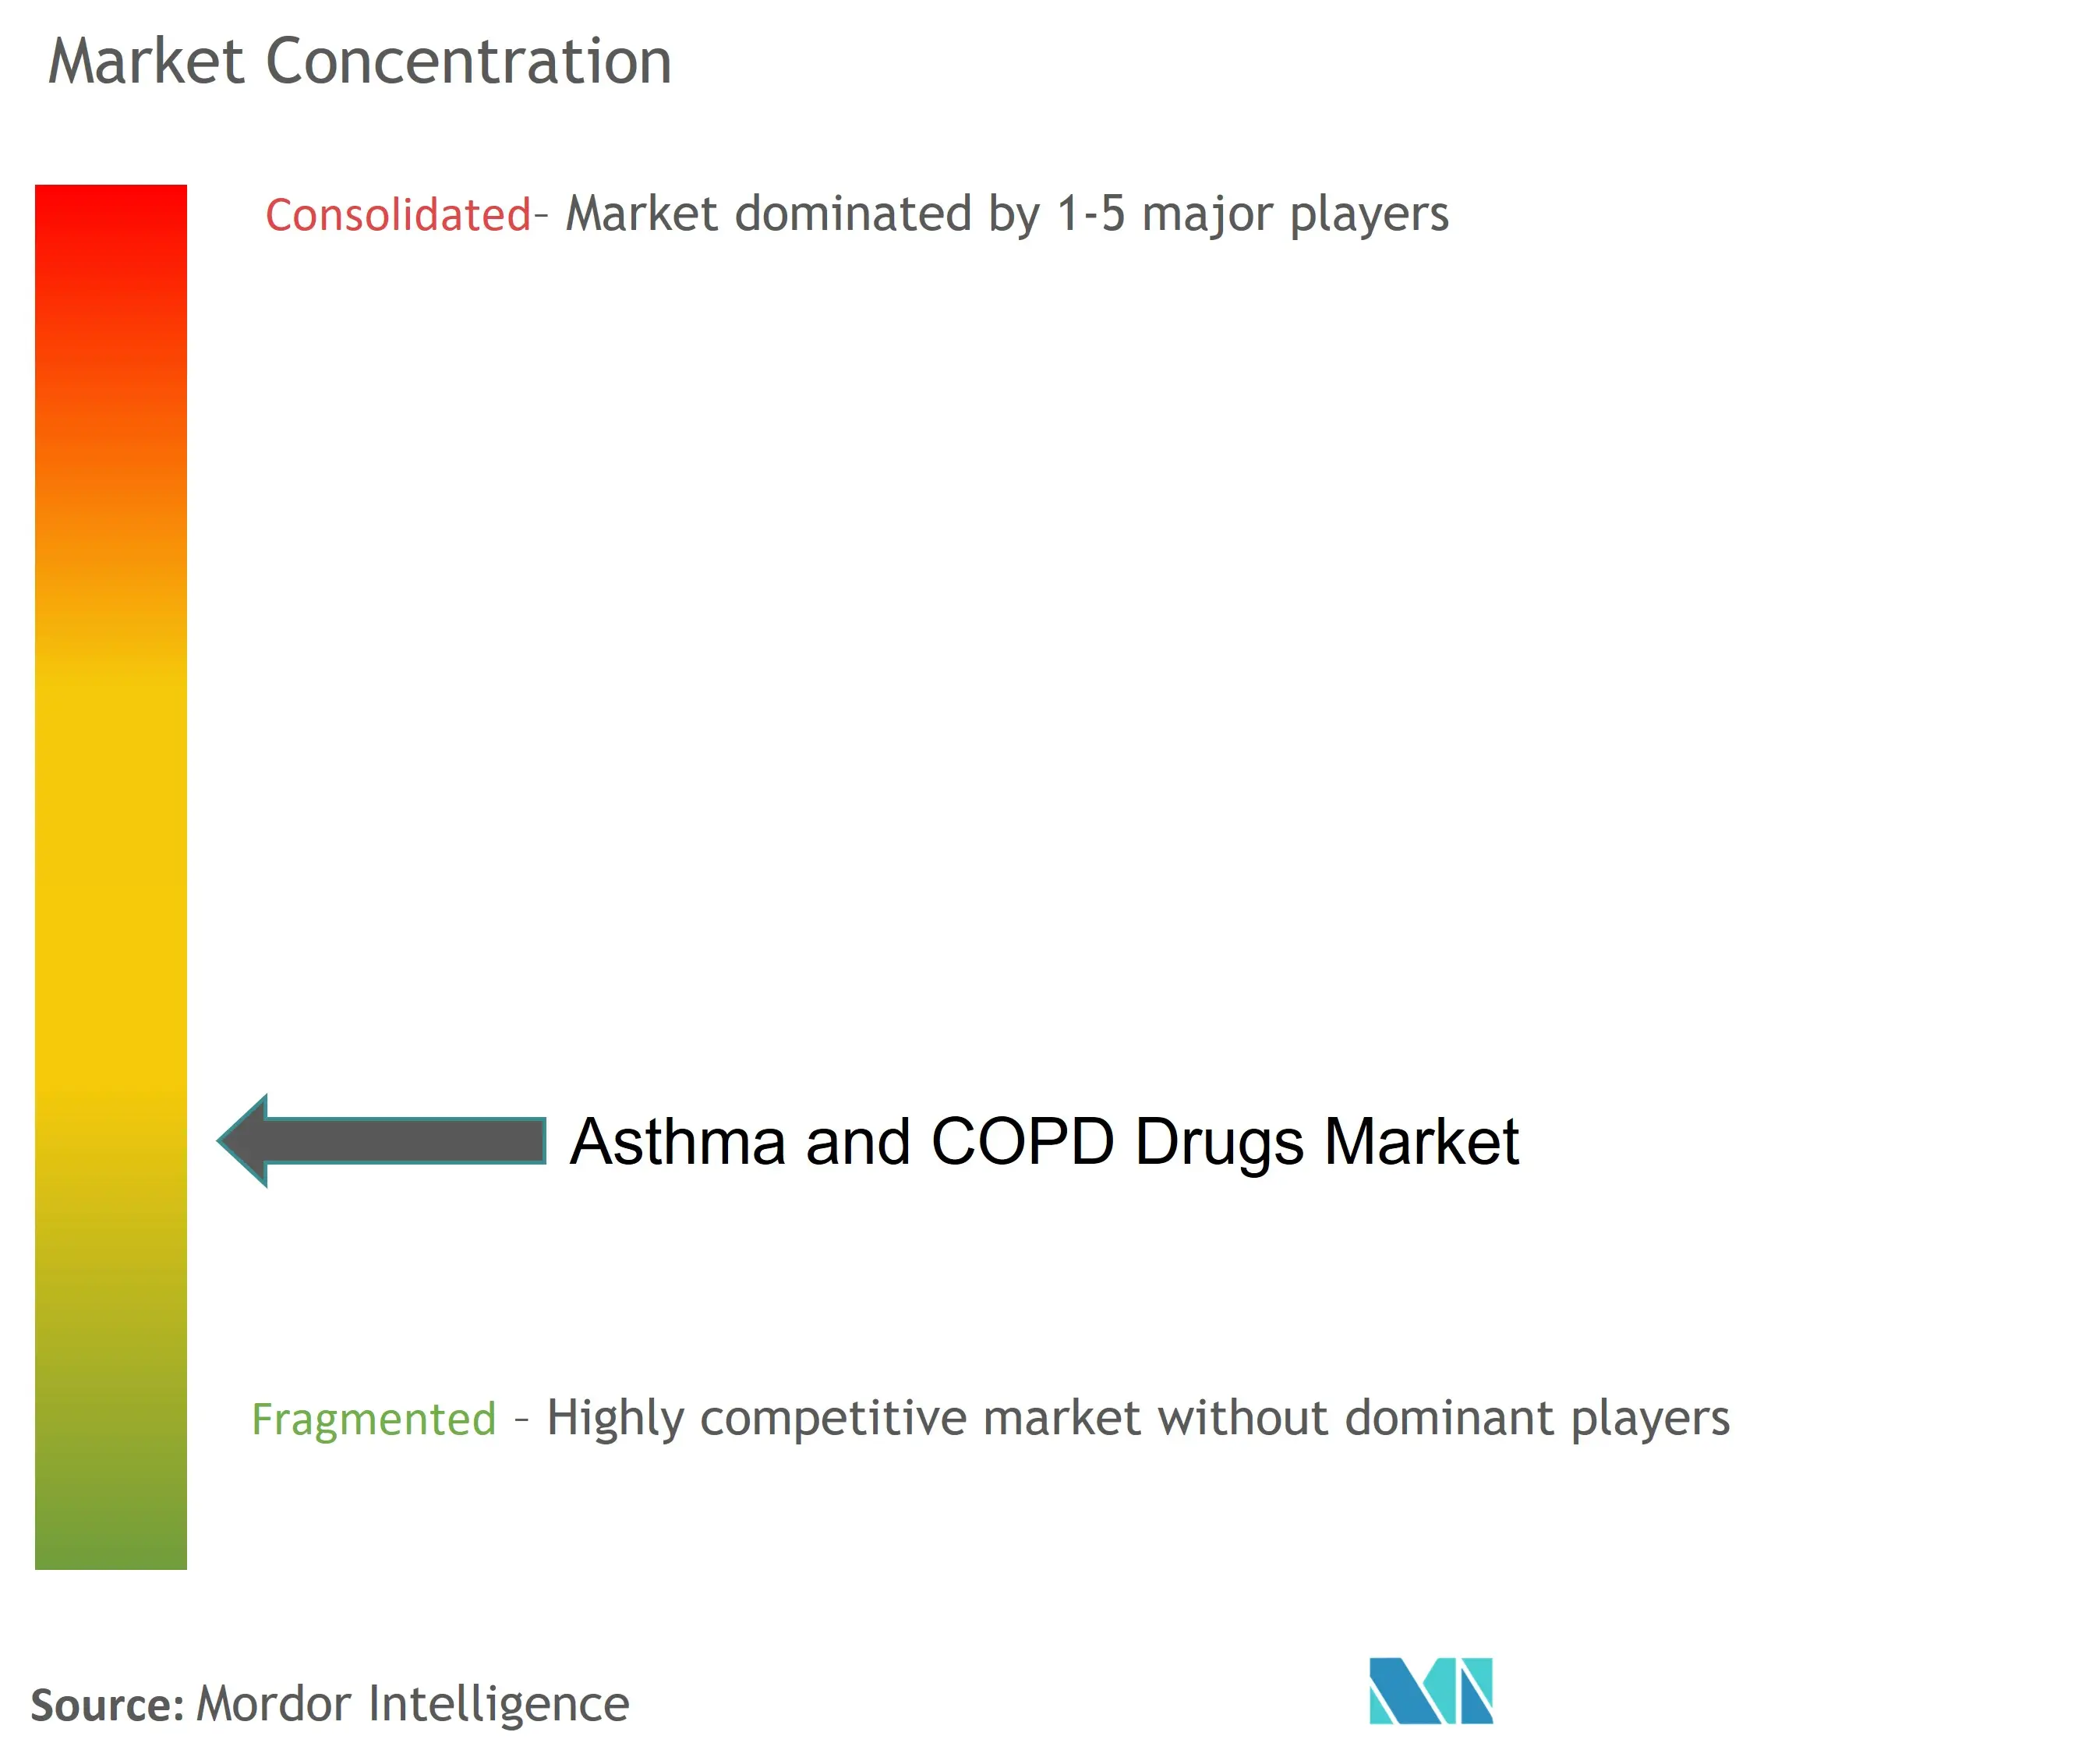 Asthma and COPD Drugs Market Concentration